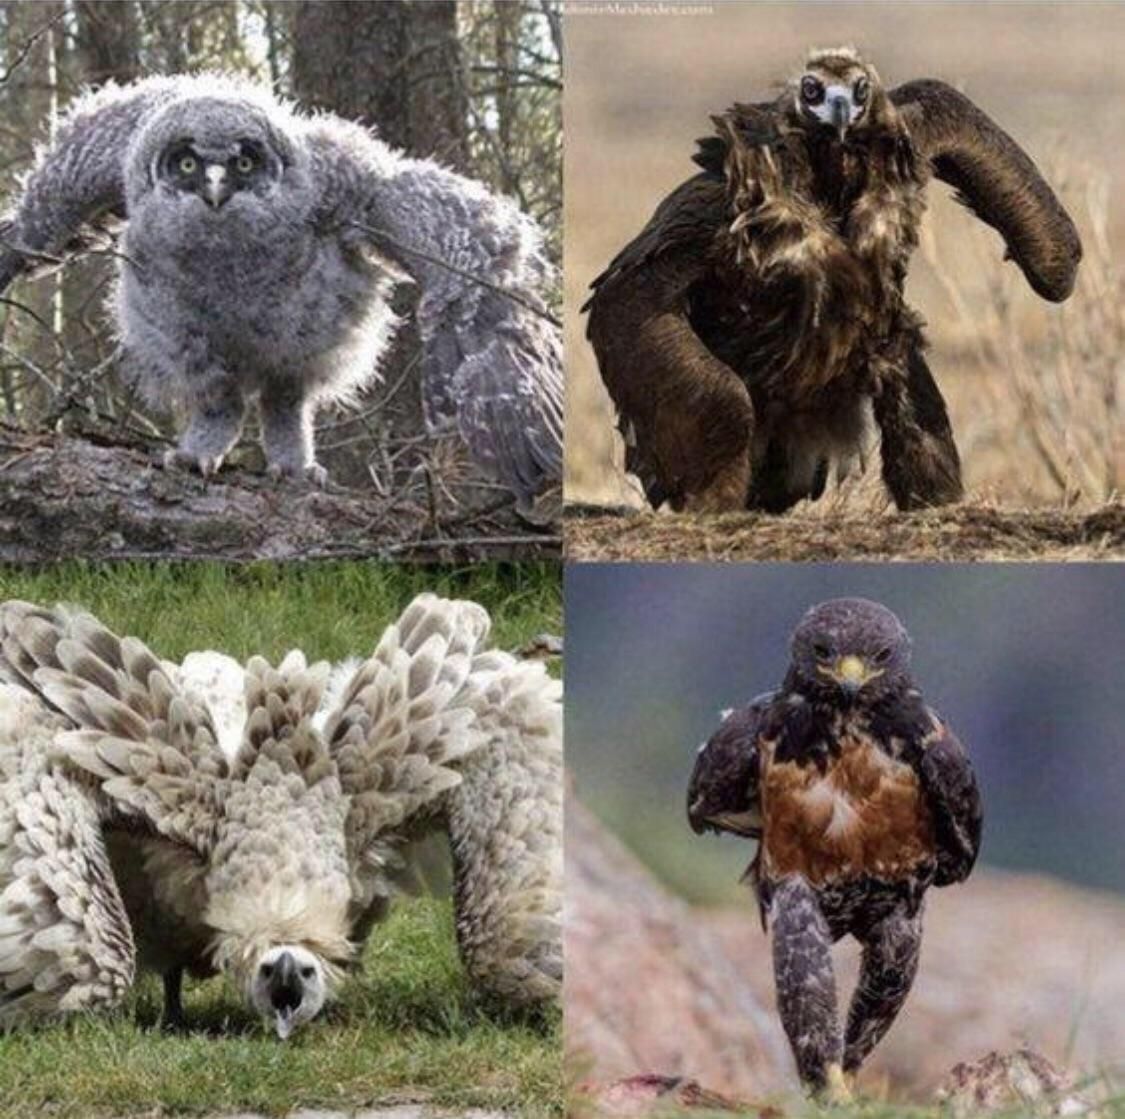 Some physically threatening avians to brighten up your day.